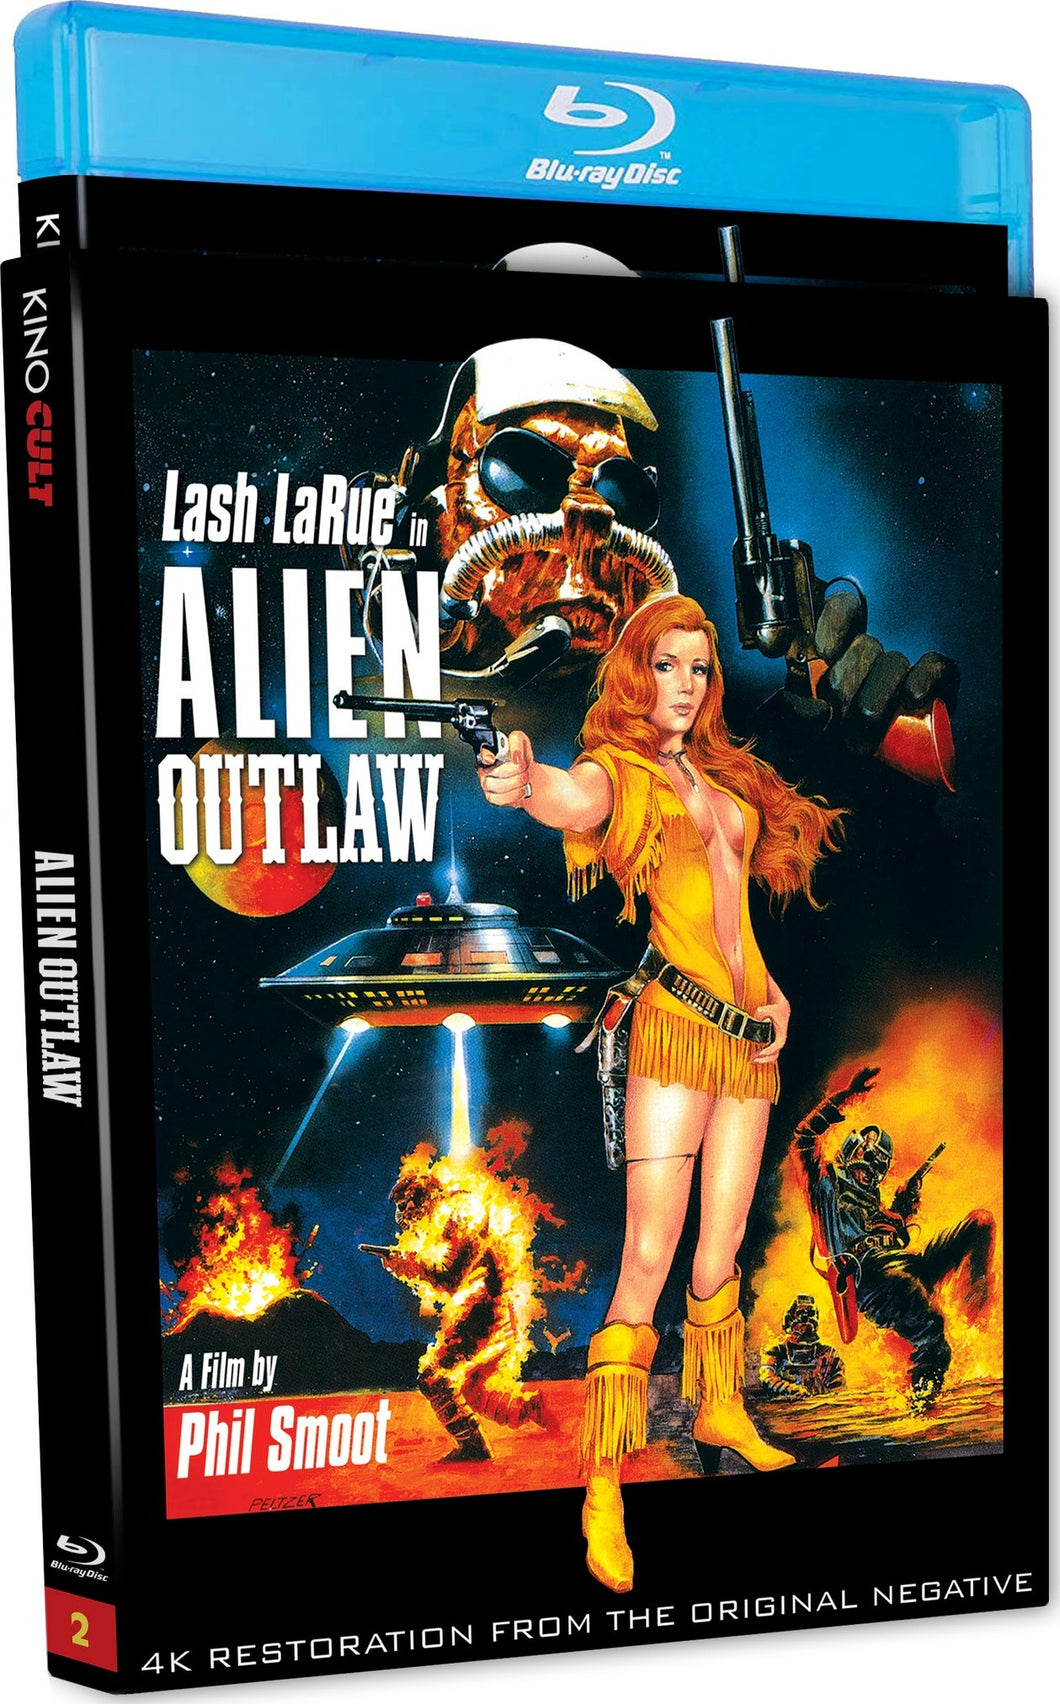 Alien Outlaw (1985) - front cover